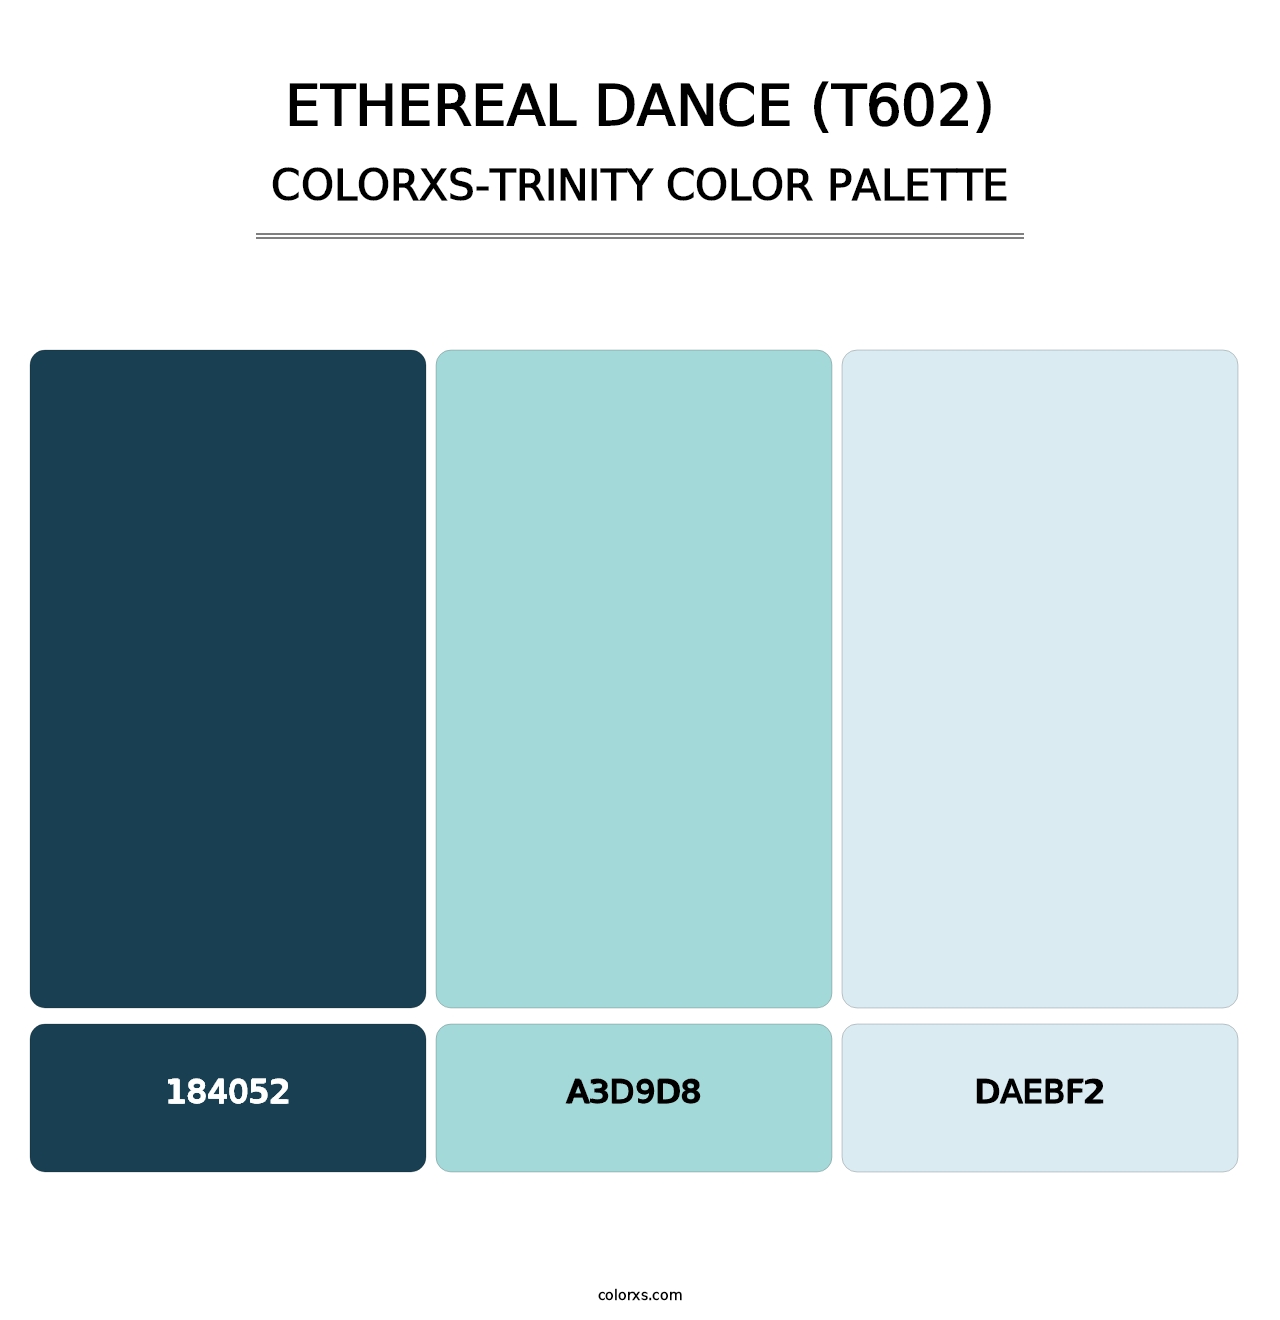 Ethereal Dance (T602) - Colorxs Trinity Palette